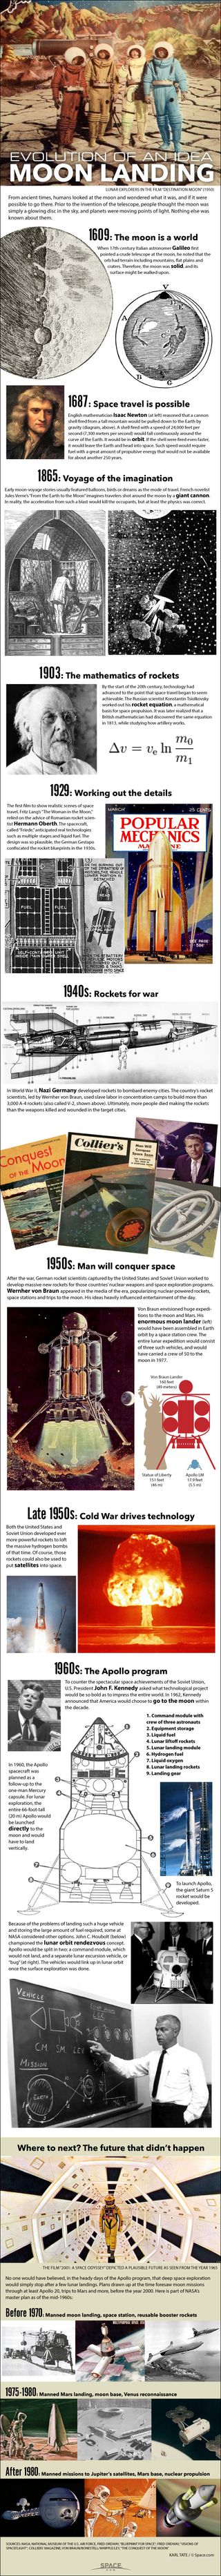 For centuries before Apollo 11 landed on the moon, the idea of going there stirred people's imaginations. See Space.com's complete look at humanity's love affair with the moon in this infographic.